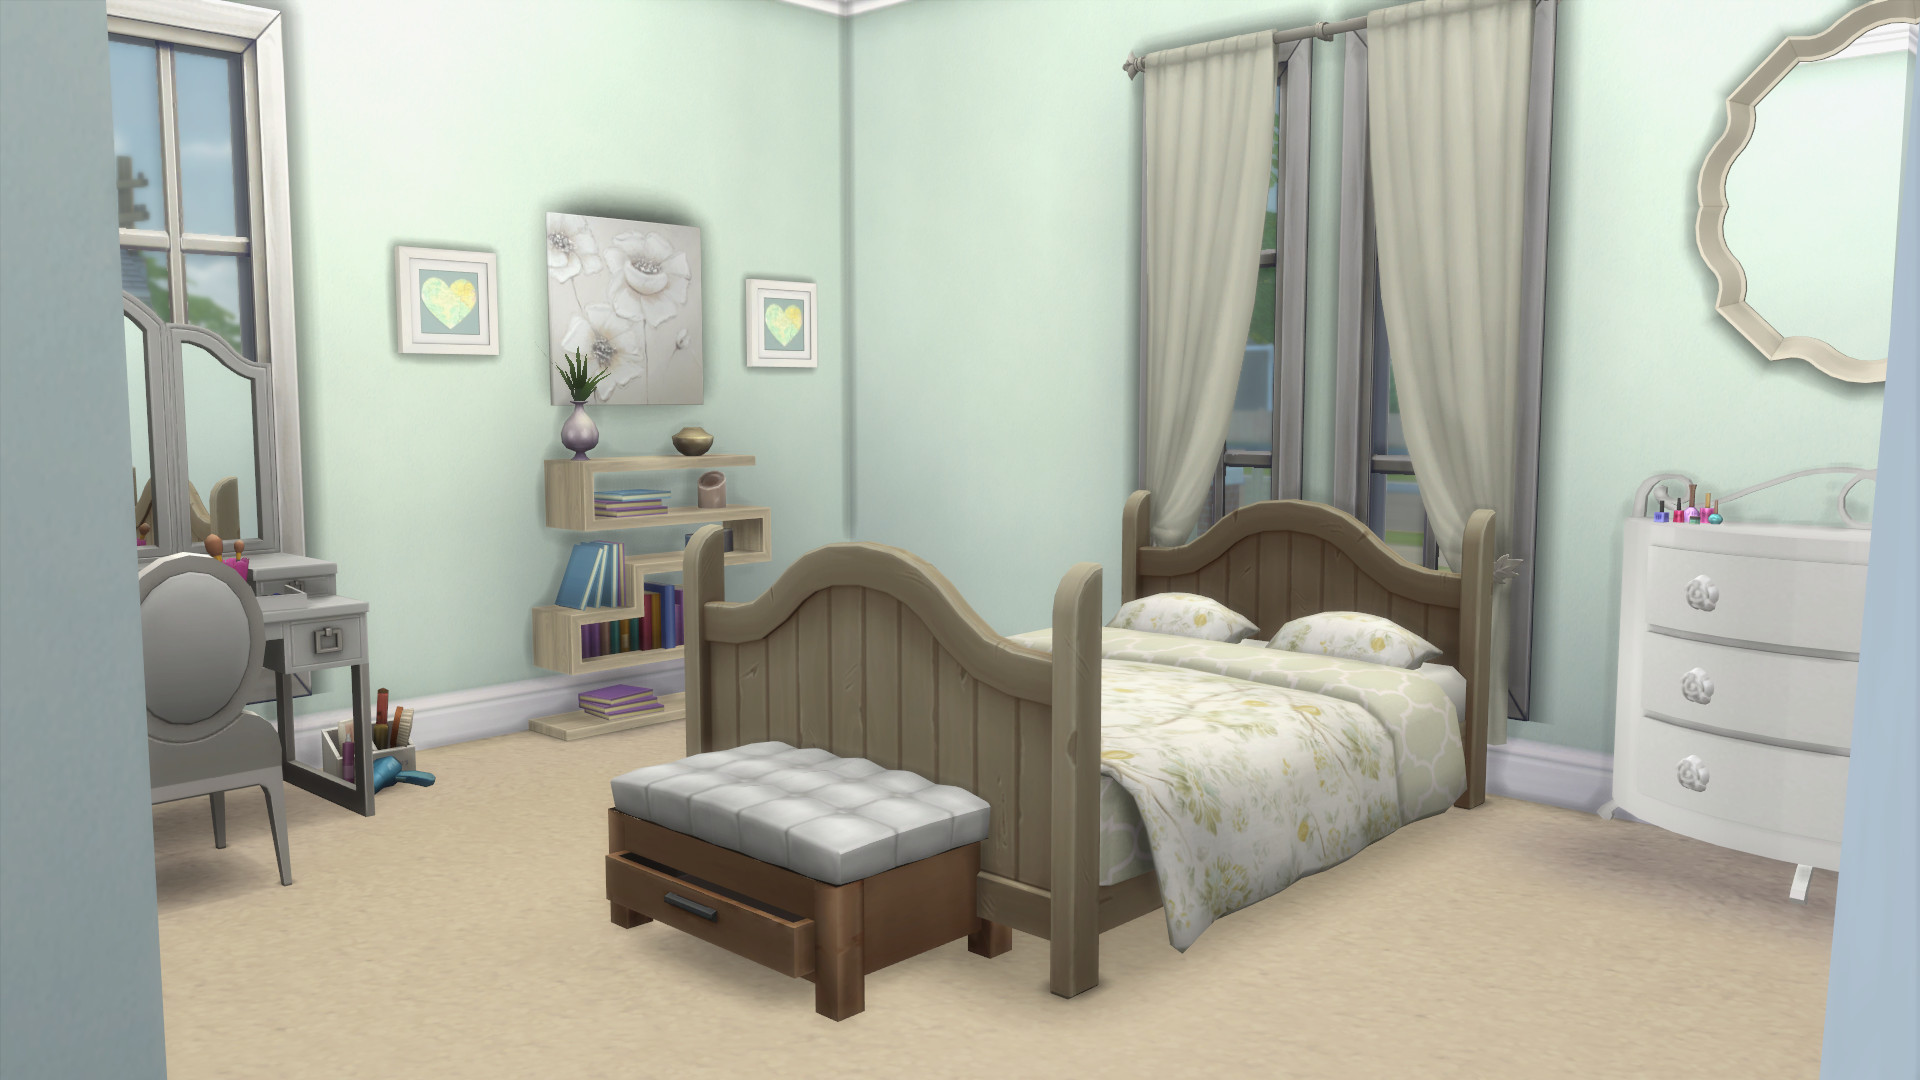 Sims 4 House Ideas Elegant Bffs House Makeover Thesims4 - Bedroom - HD Wallpaper 